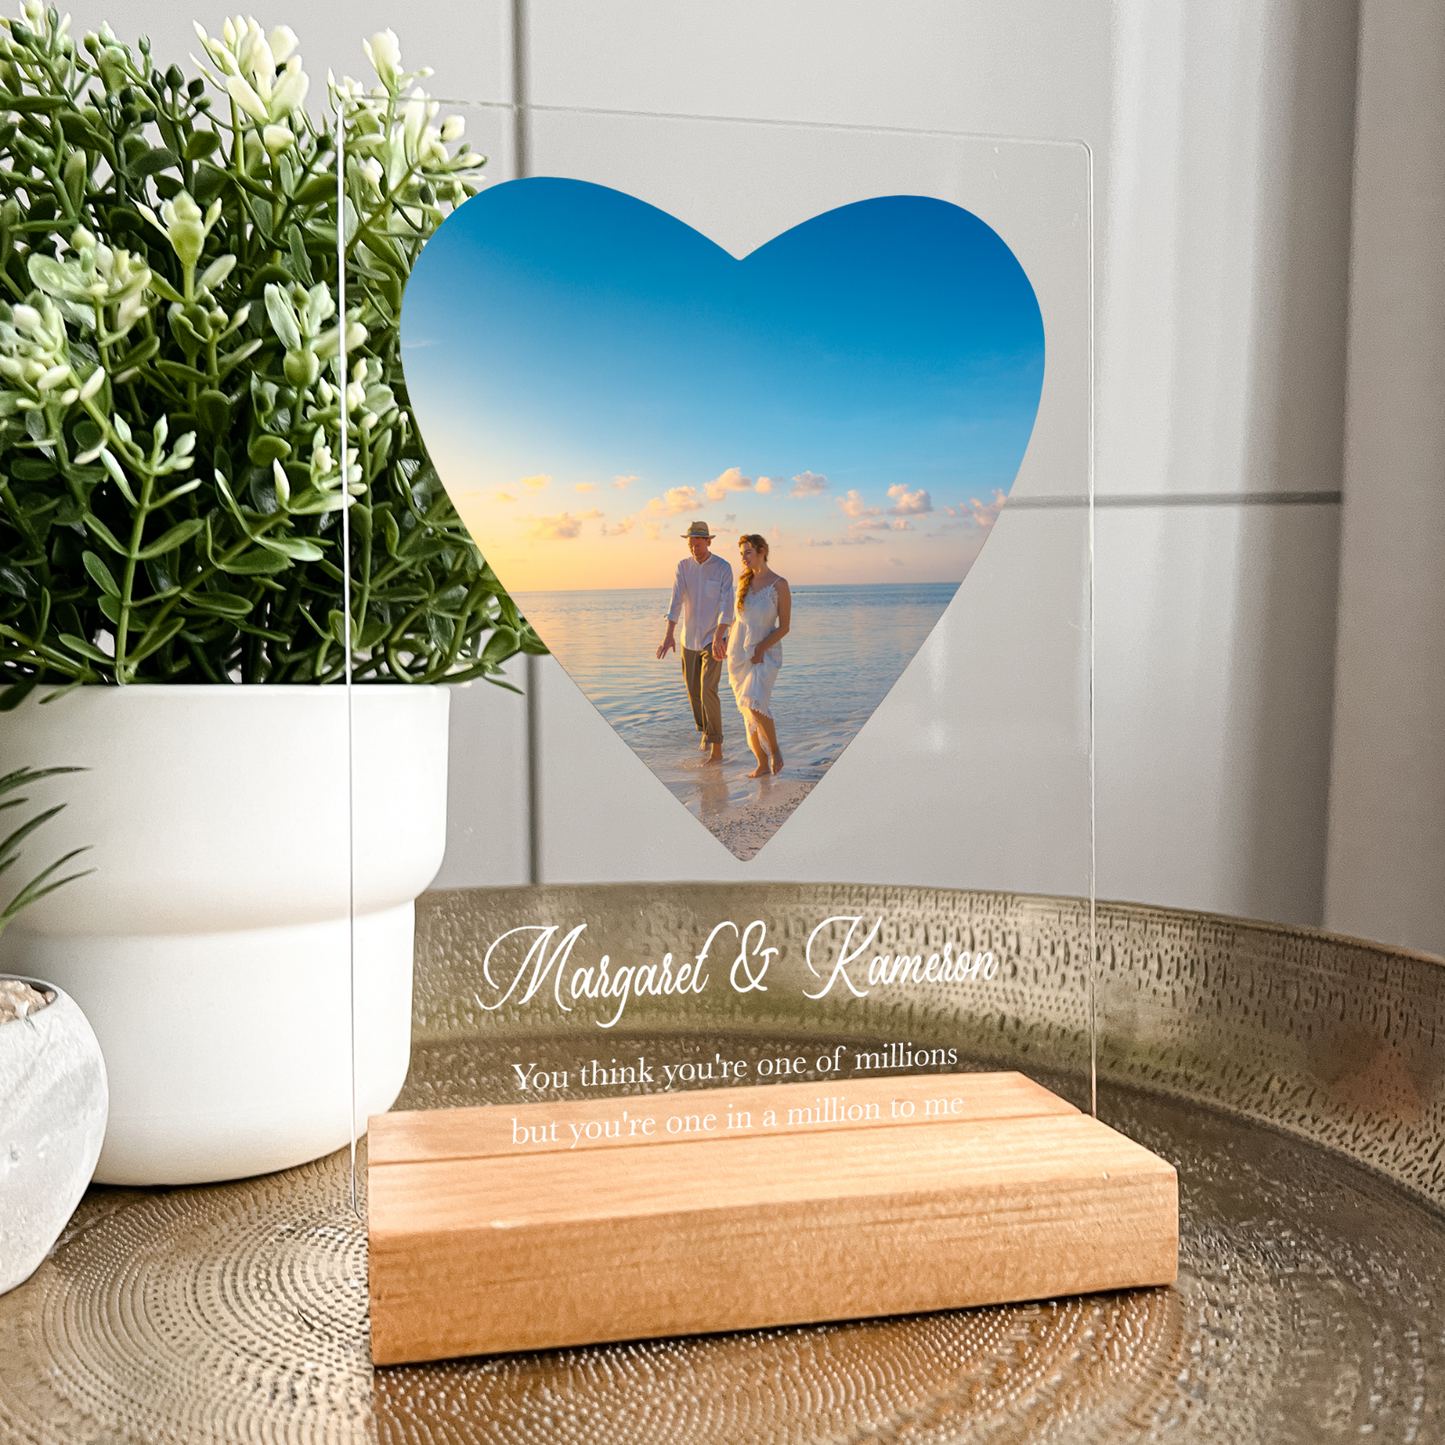 Personalized Heart Shape Photo Frame With Wood Base, Shower, Wedding, Her Gifts